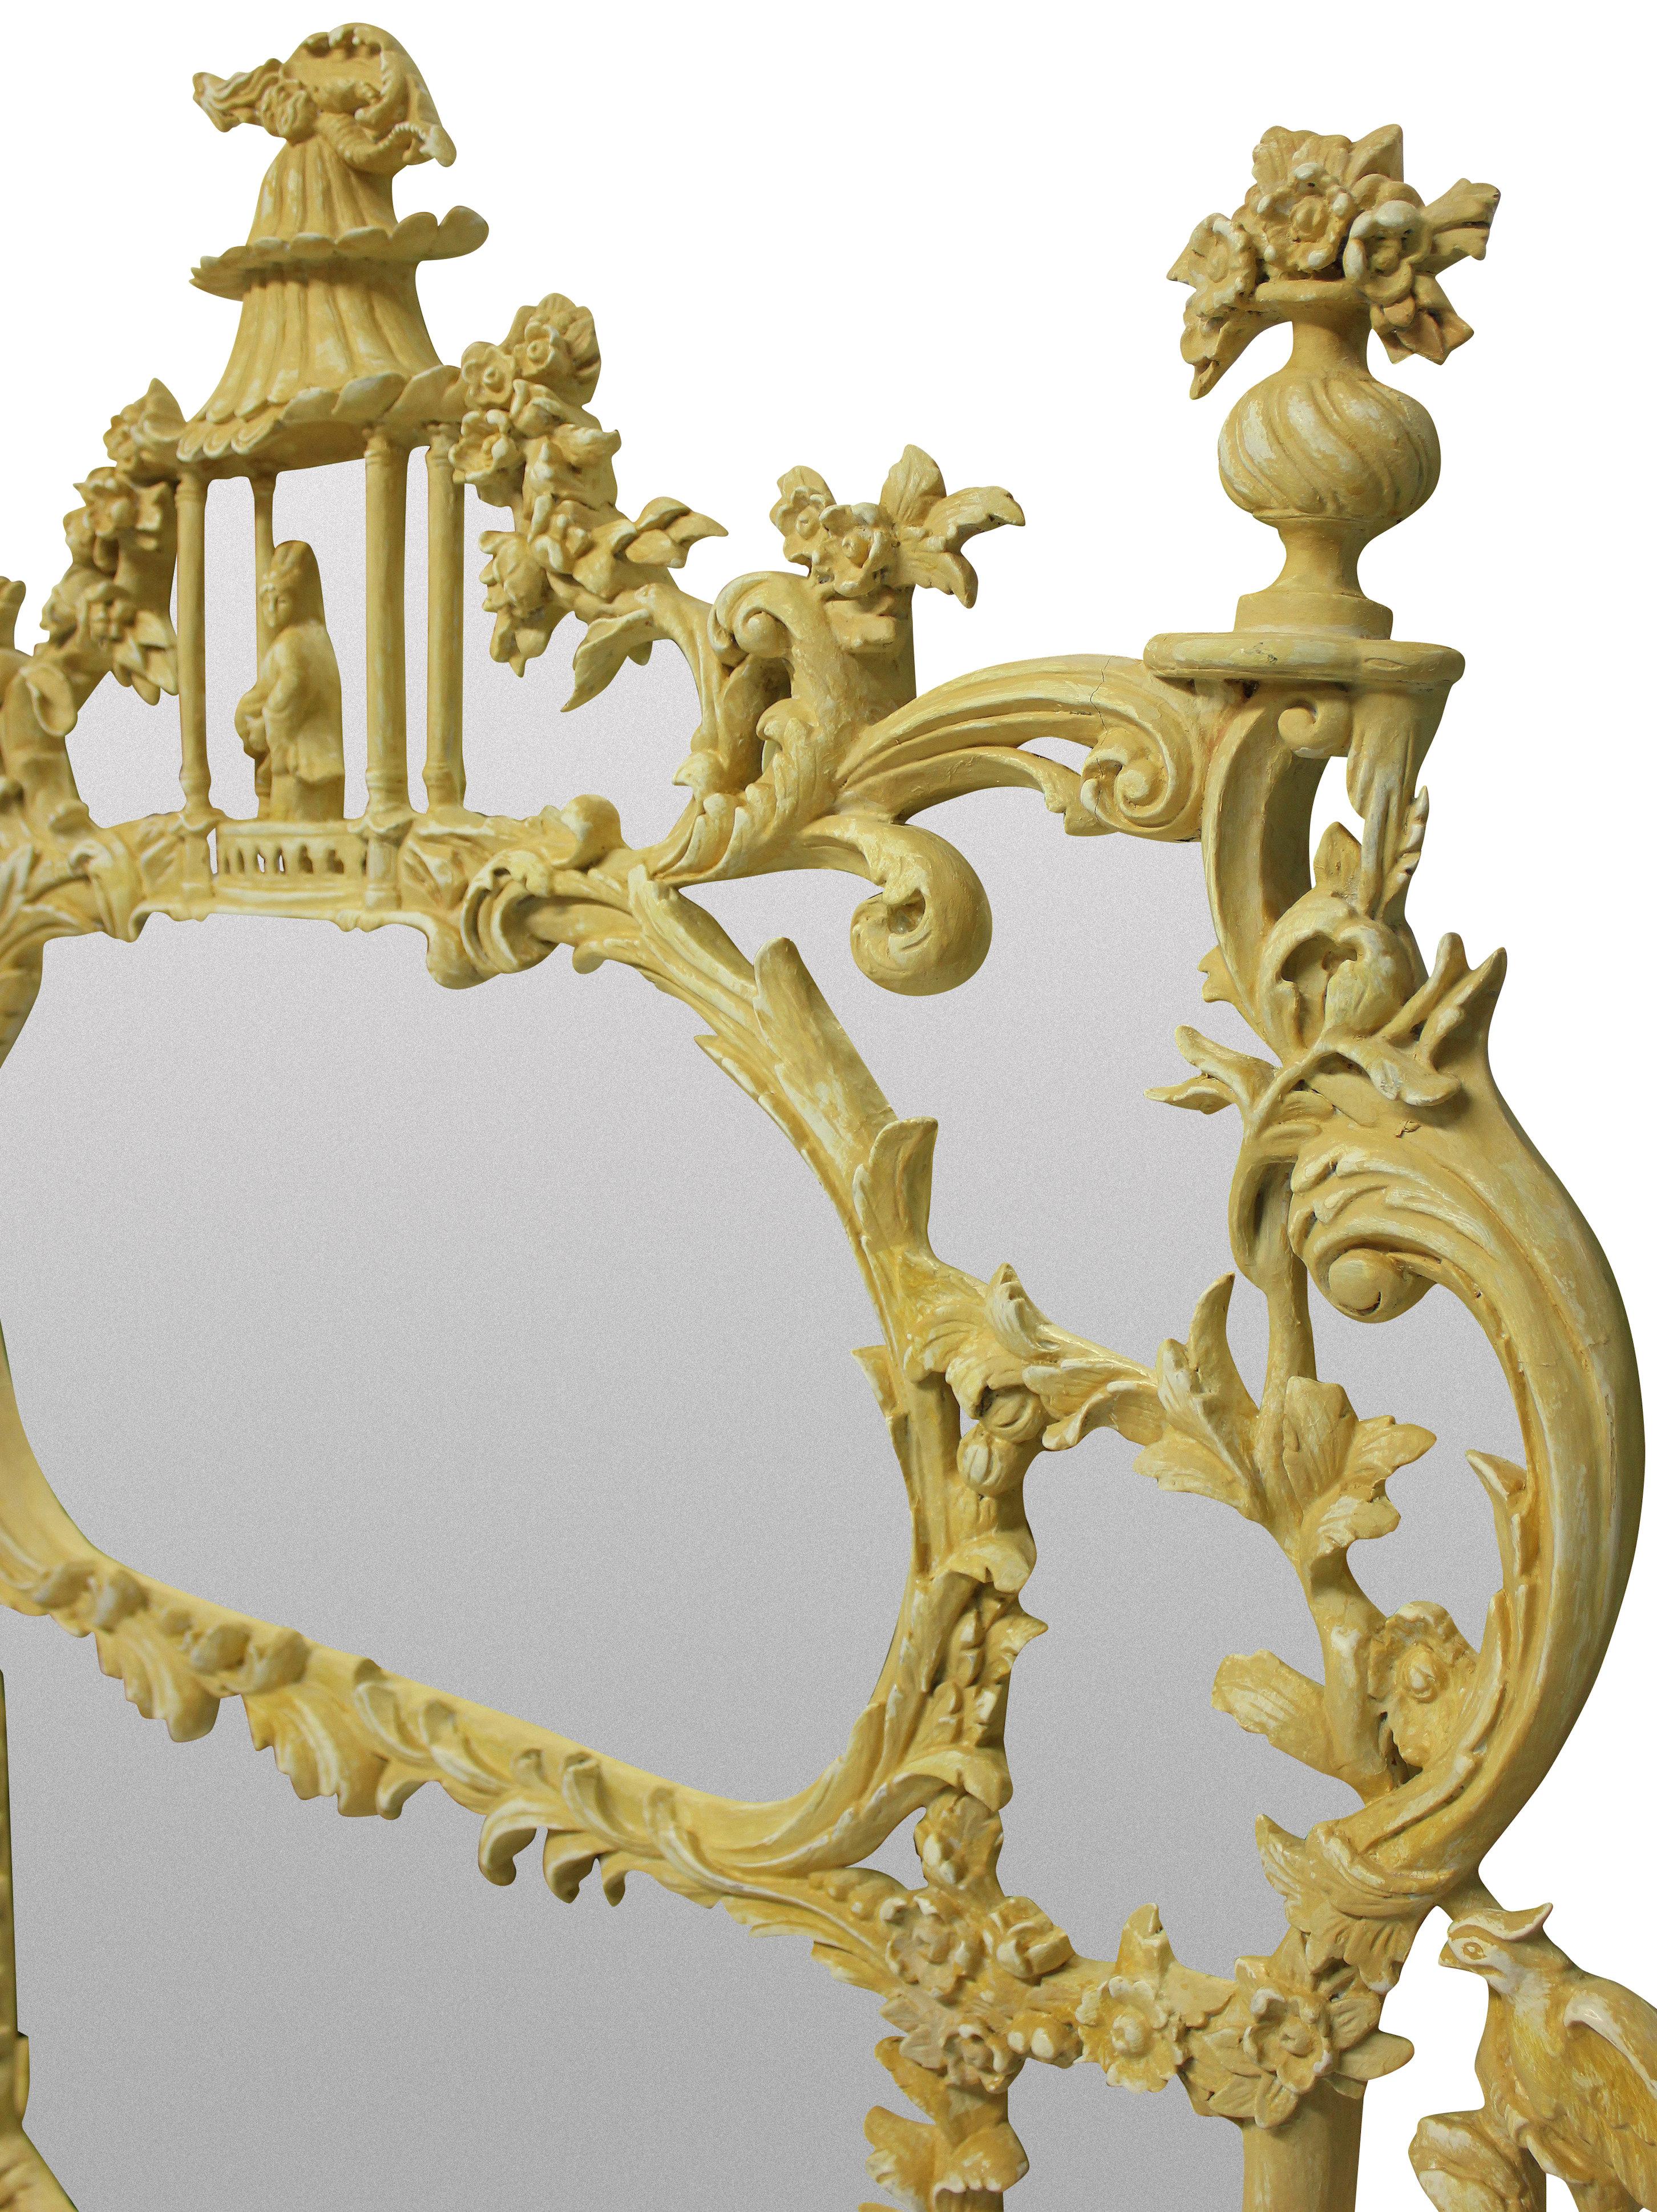 Hand-Painted Chinese Chippendale Revival Overmantel Mirror